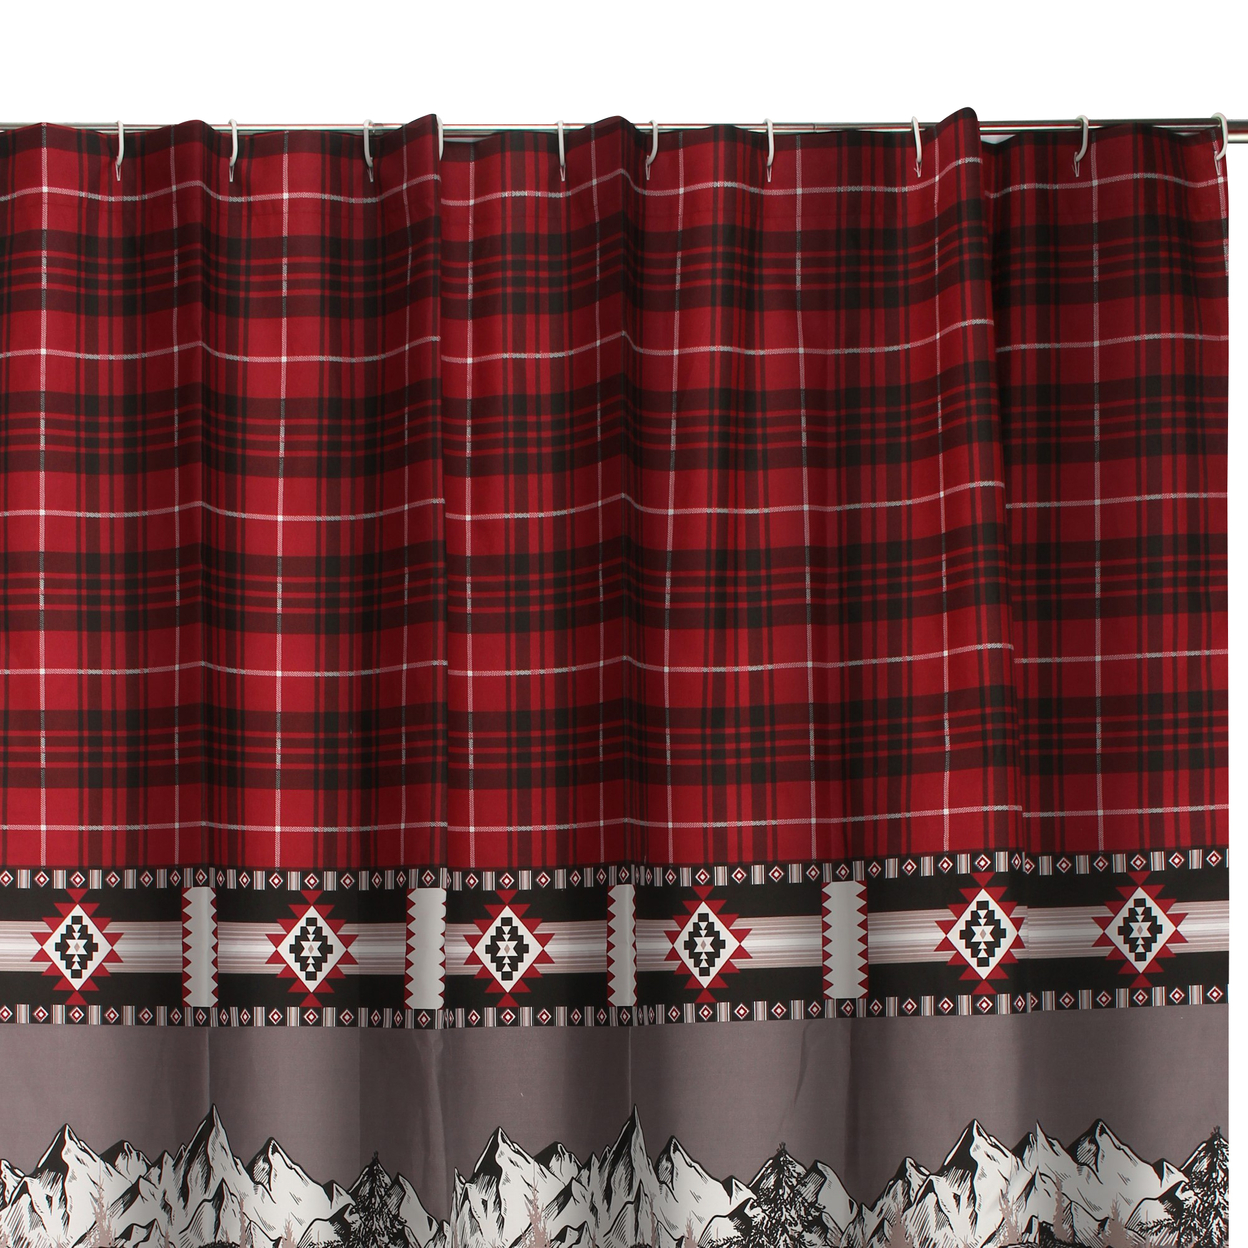 Sofia 72 Inch Bear Shower Curtain, Red And Black Plaid, Poly Microfiber